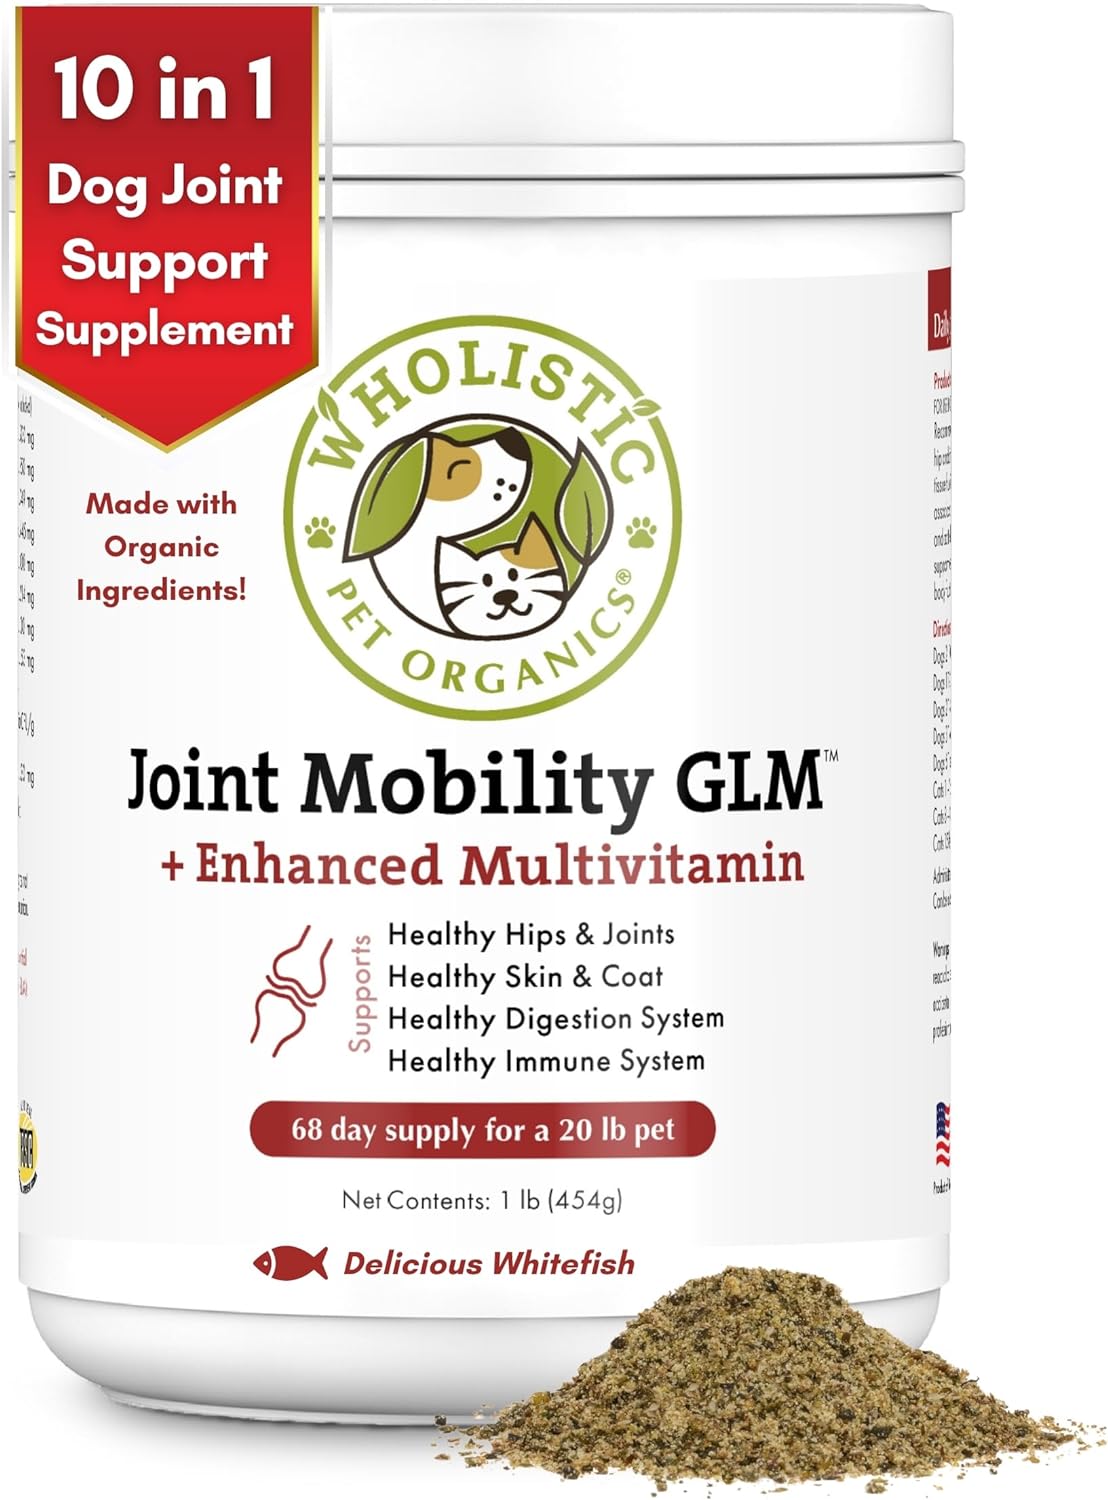 Wholistic Pet Organics: Joint Support Supplement for Dogs - Green Lipped Mussel (1lb) with Glucosamine & Chondroitin - Dog Hip & Joint Pain Relief - Natural Arthritis Relief & Long-Term Joint Health